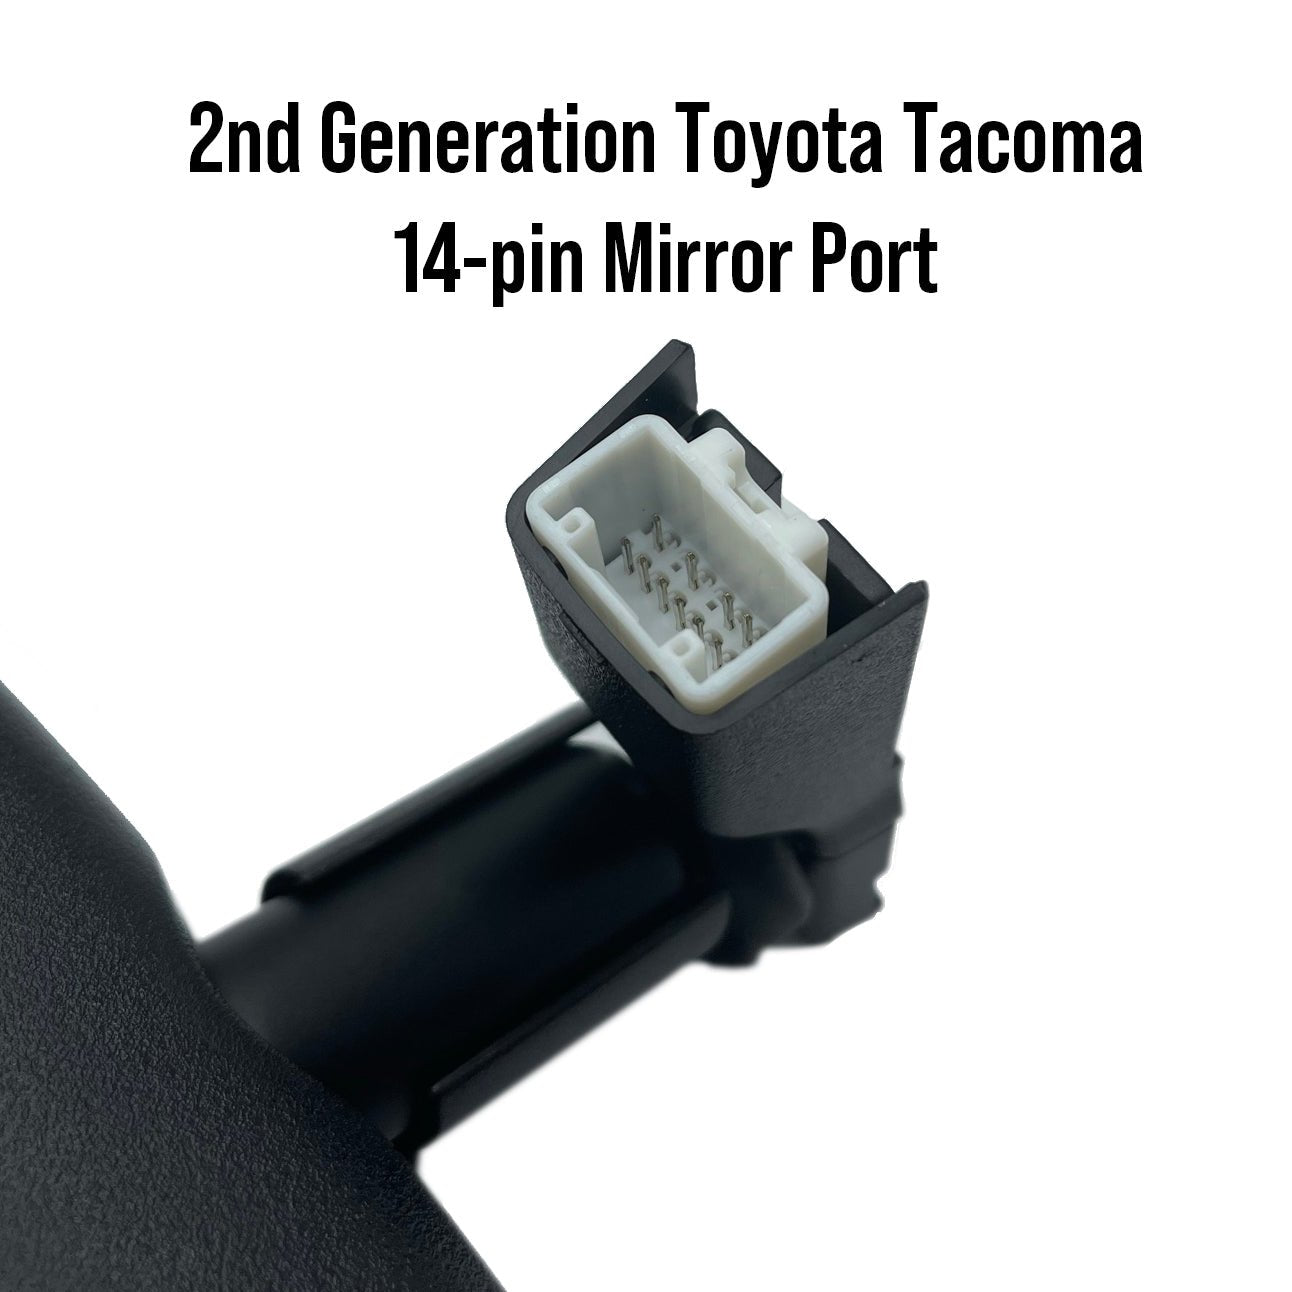 Dash Cam Adapter (14-pin for 2nd Generation Toyota Tacoma) - Dongar Technologies LLC